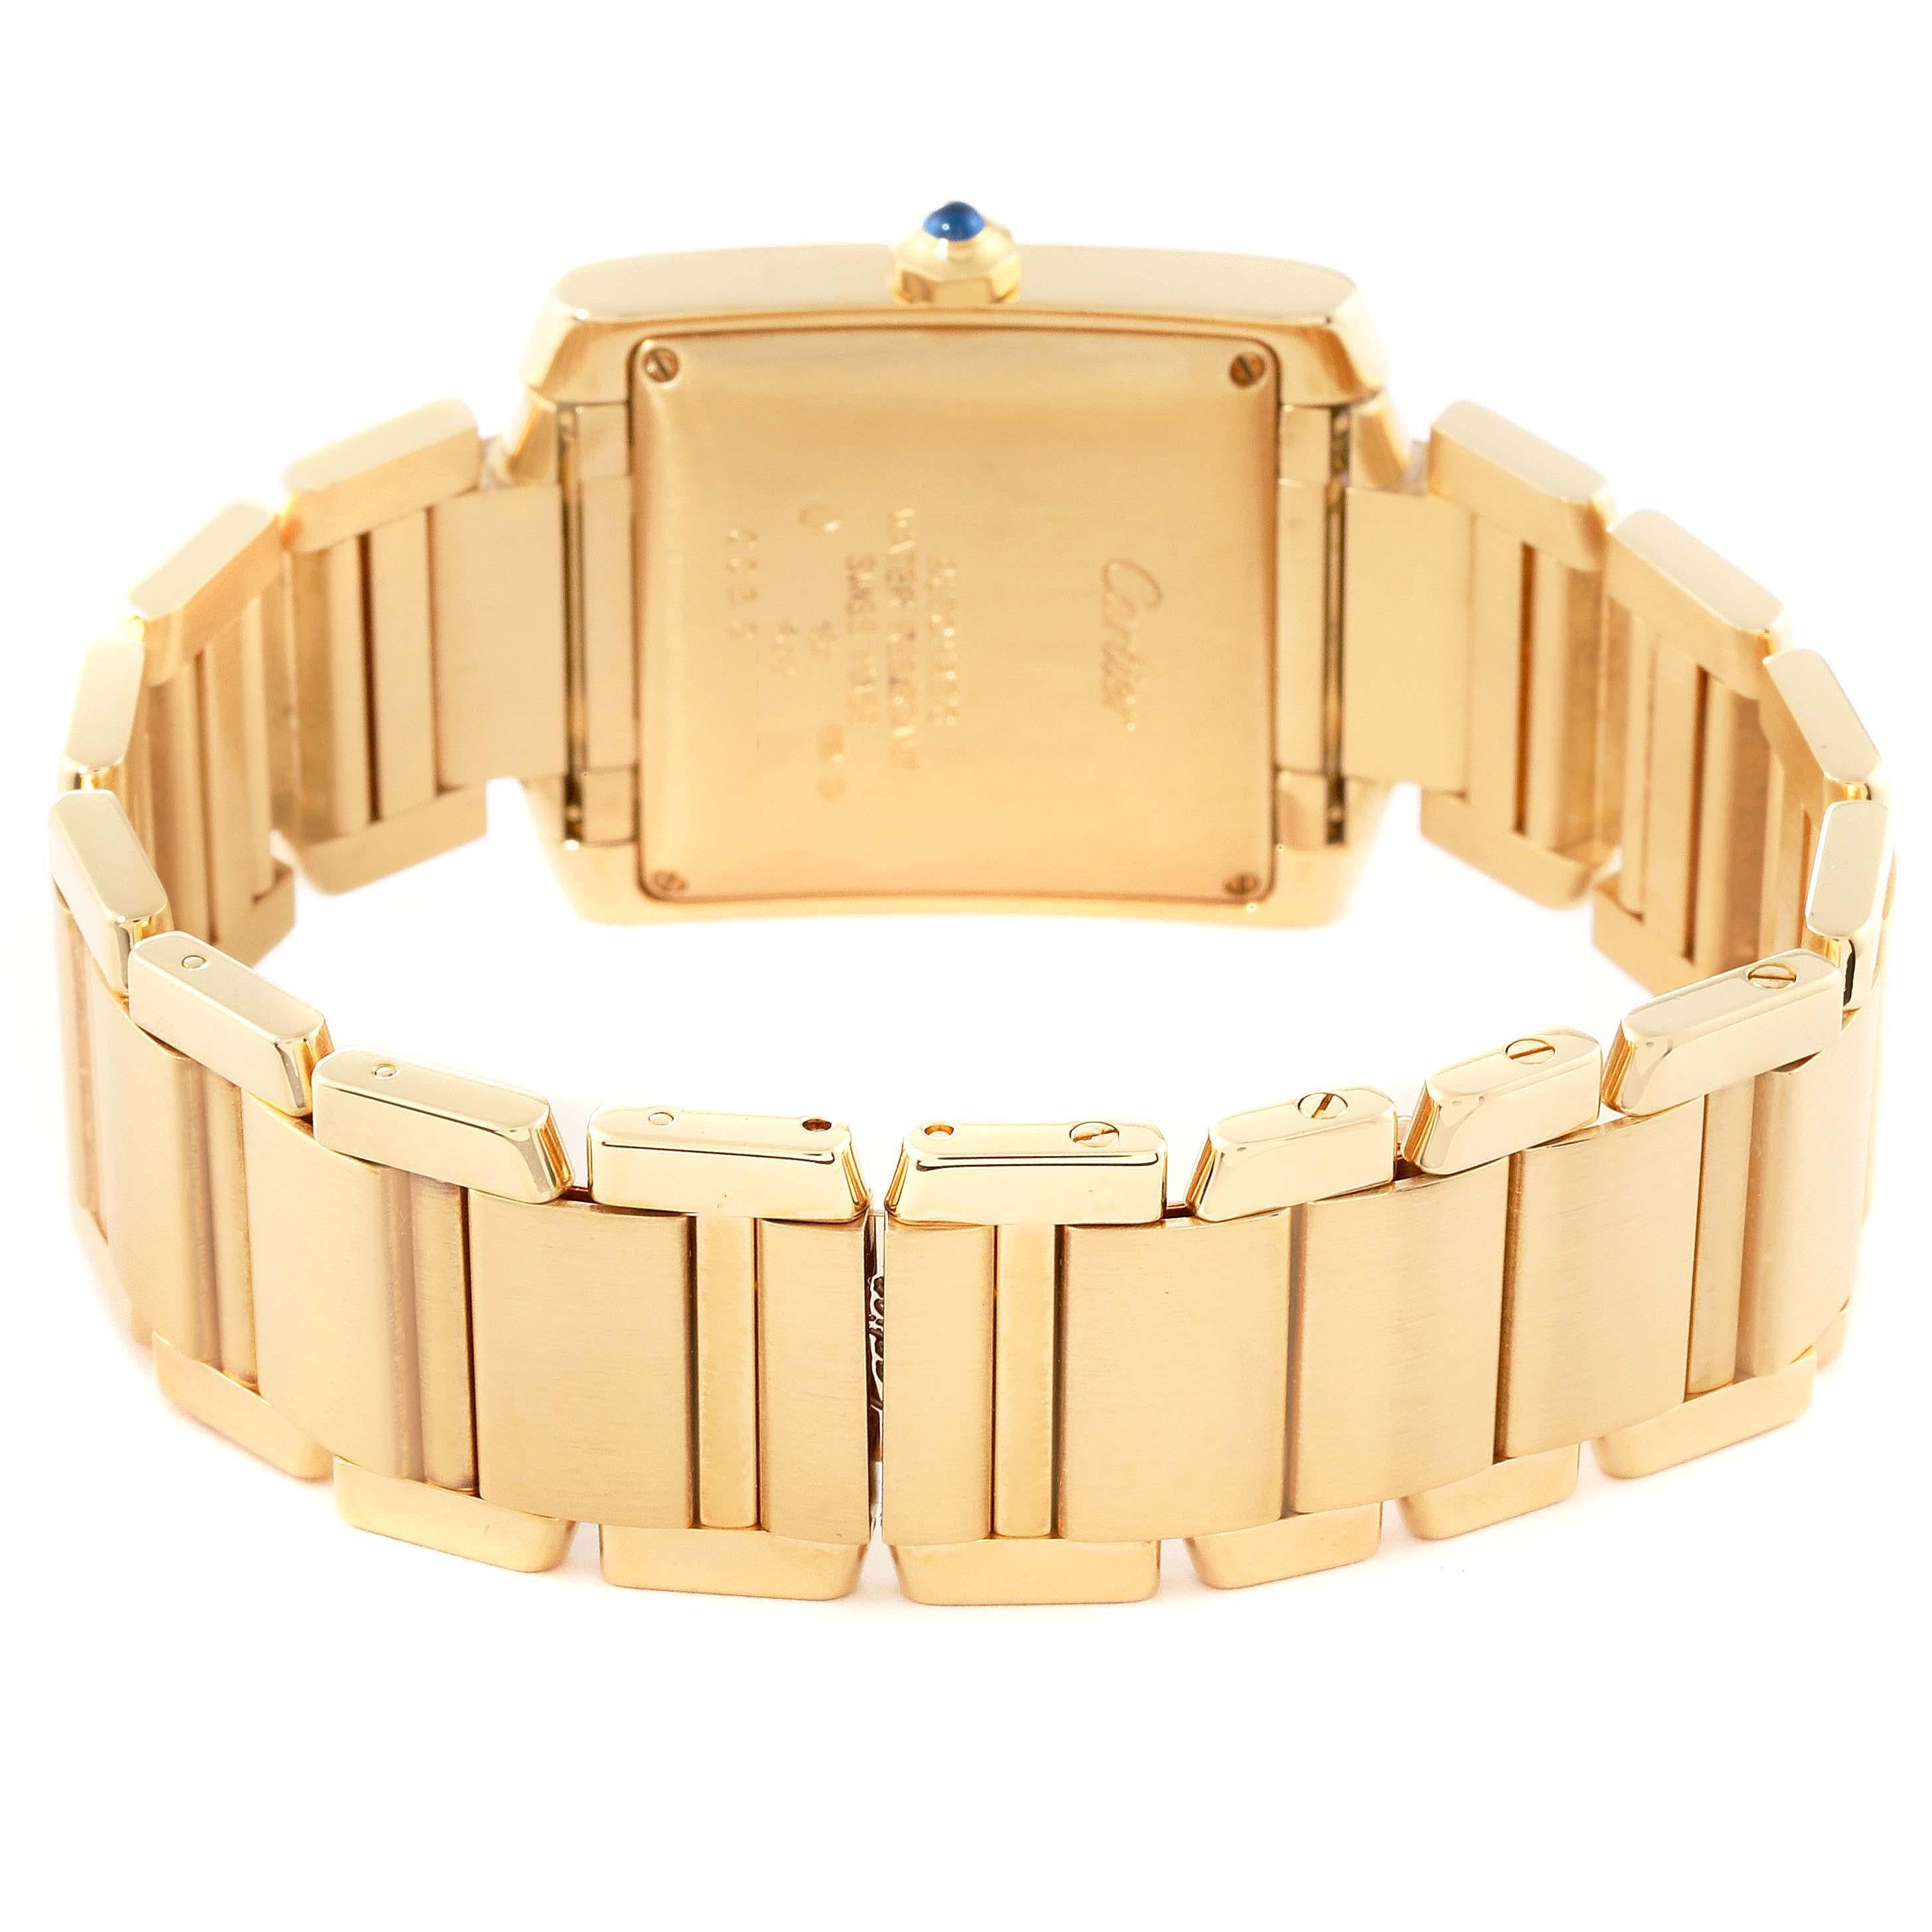 Cartier Tank Francaise Large Yellow Gold Silver Dial Mens Watch W50001R2 5